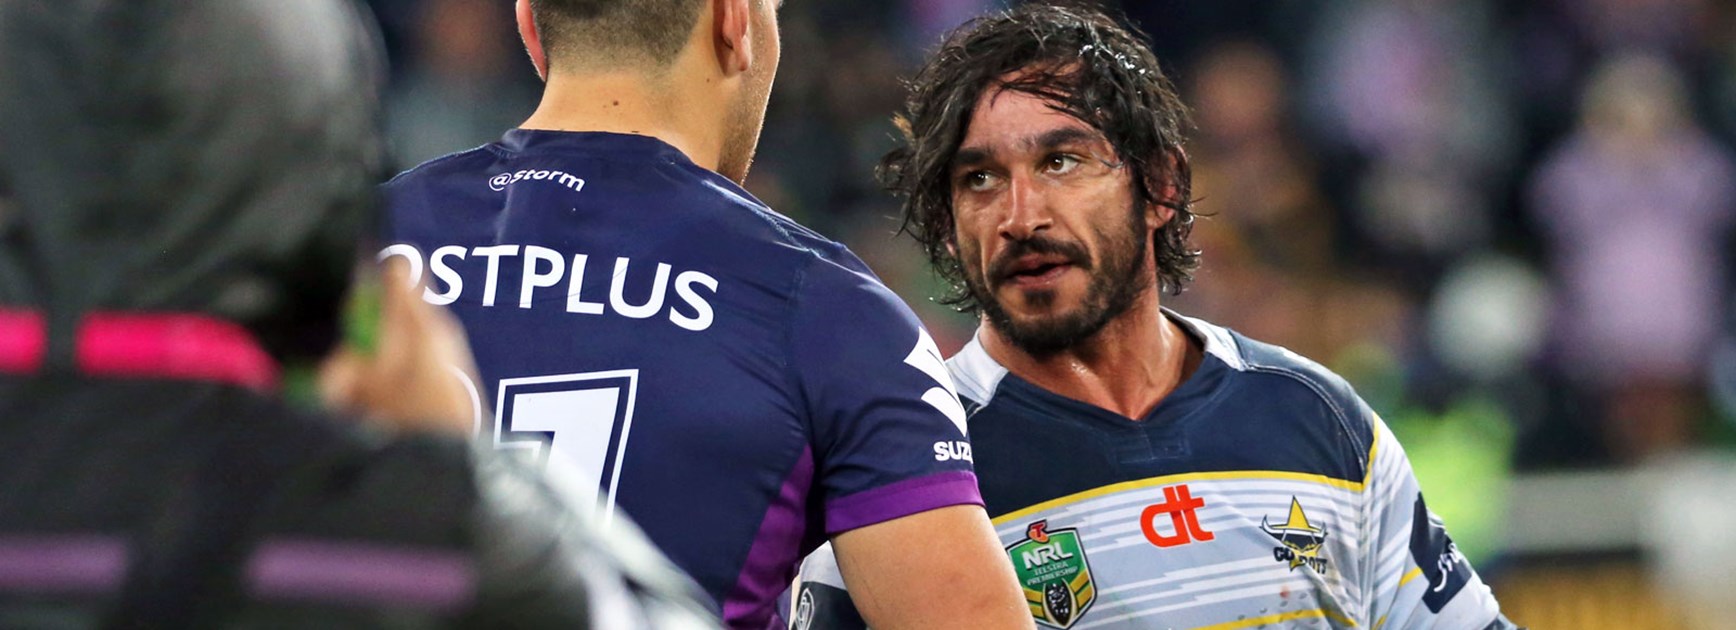 Cowboys halfback Johnathan Thurston following his side's loss to the Storm in Finals Week 1.